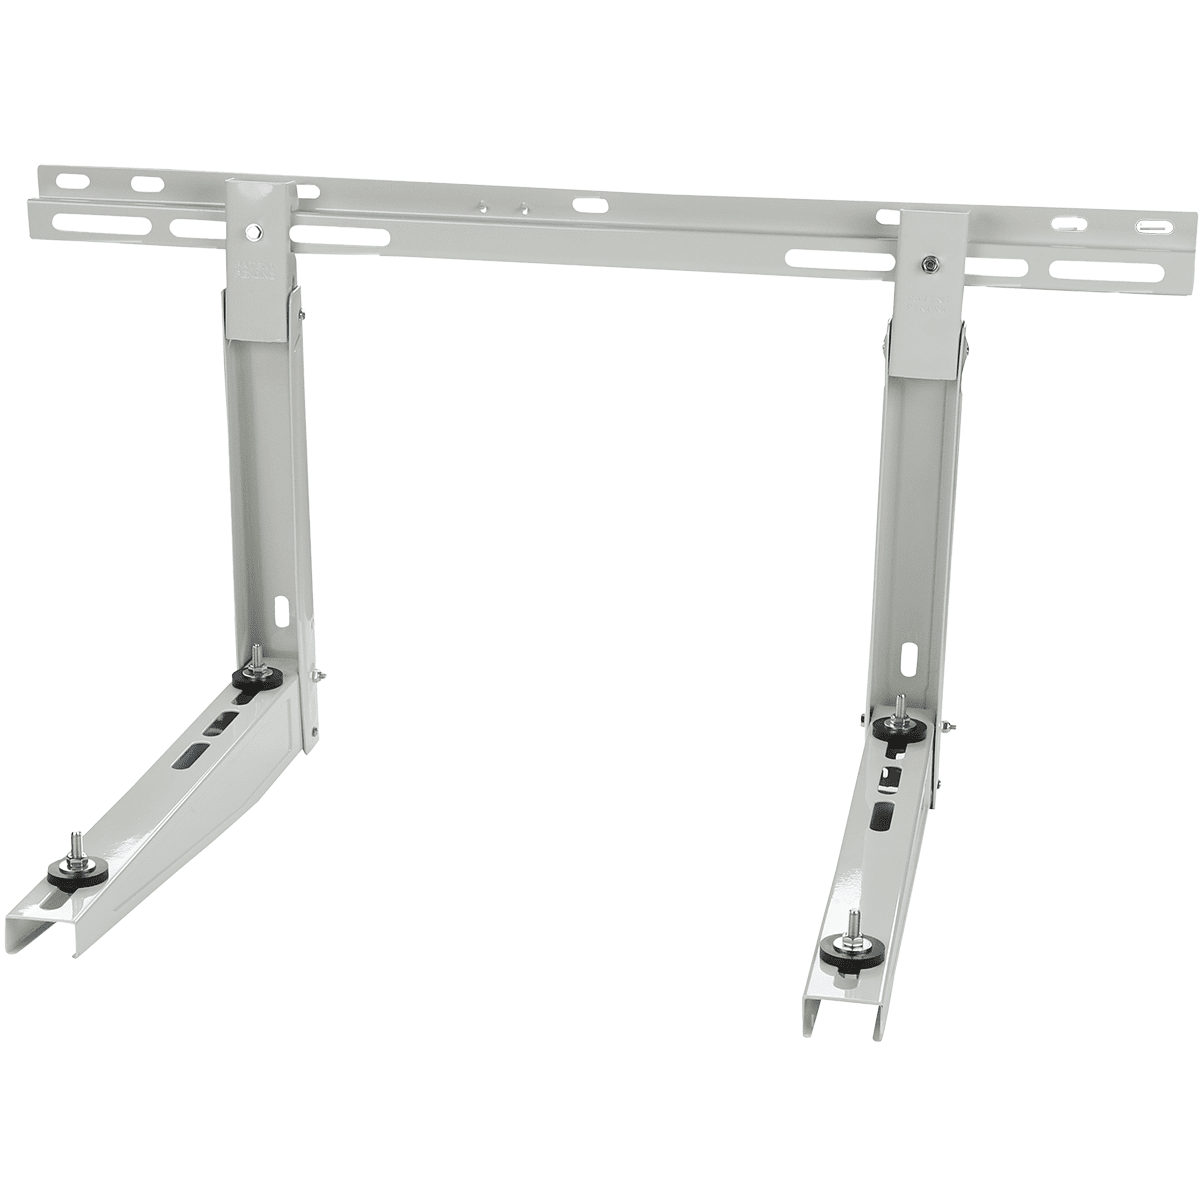 Diversitech Hef-T-Bracket Wall Bracket with Easy Fit for Condensers